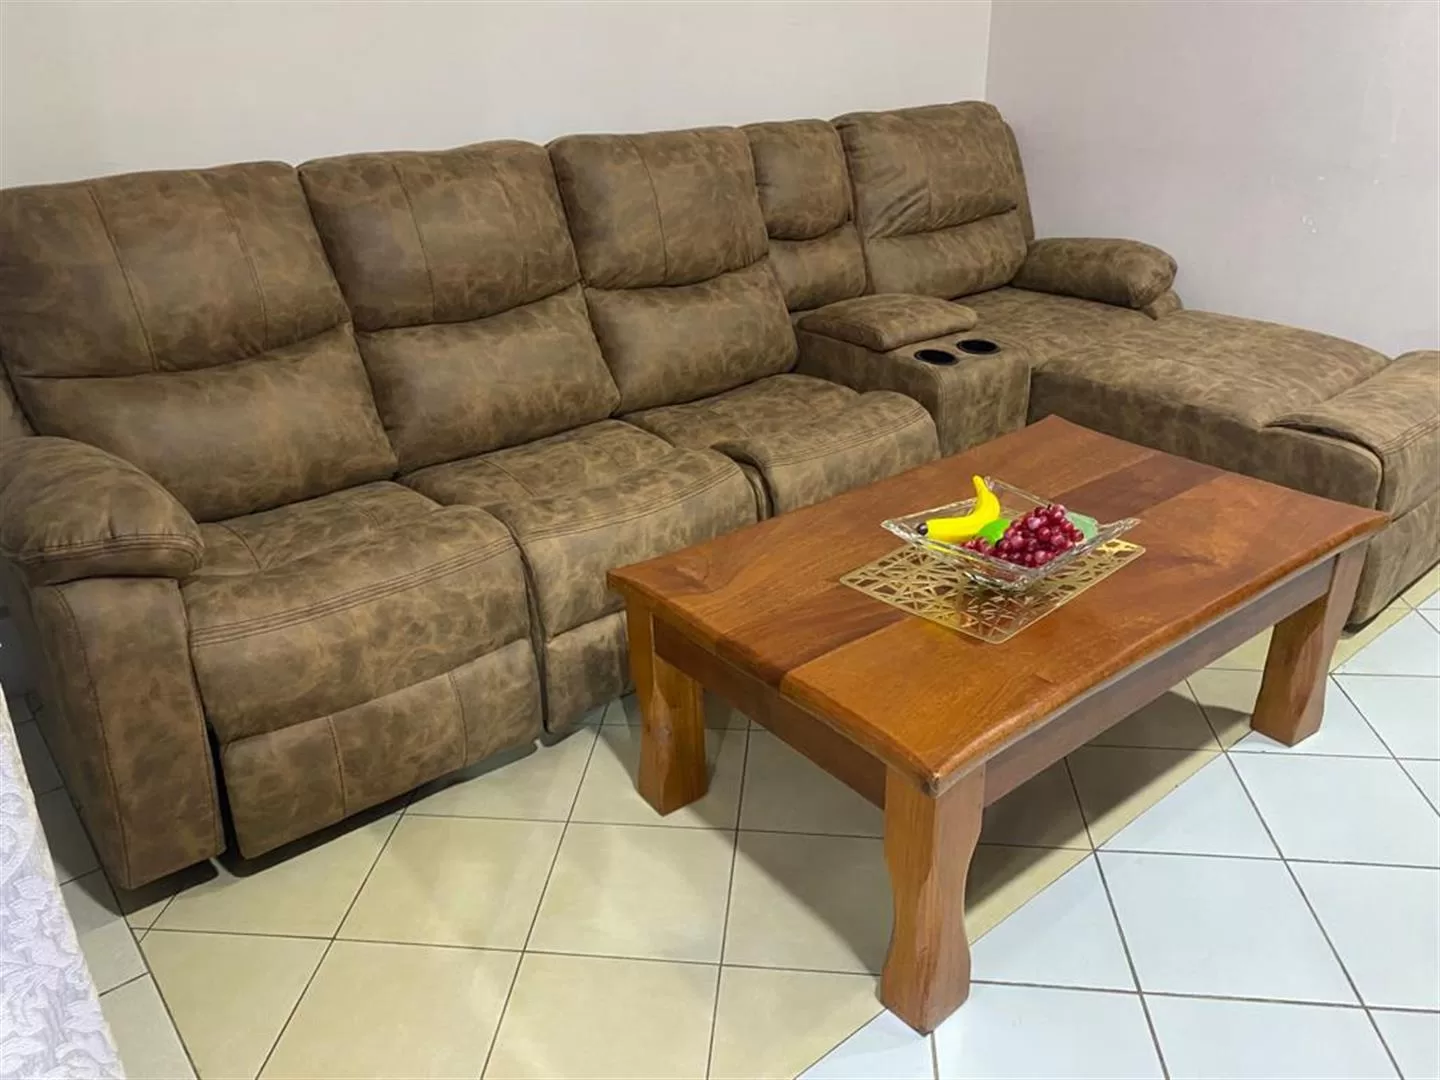 Miam yellow-brown L-shaped 6-seater sectional recliner.